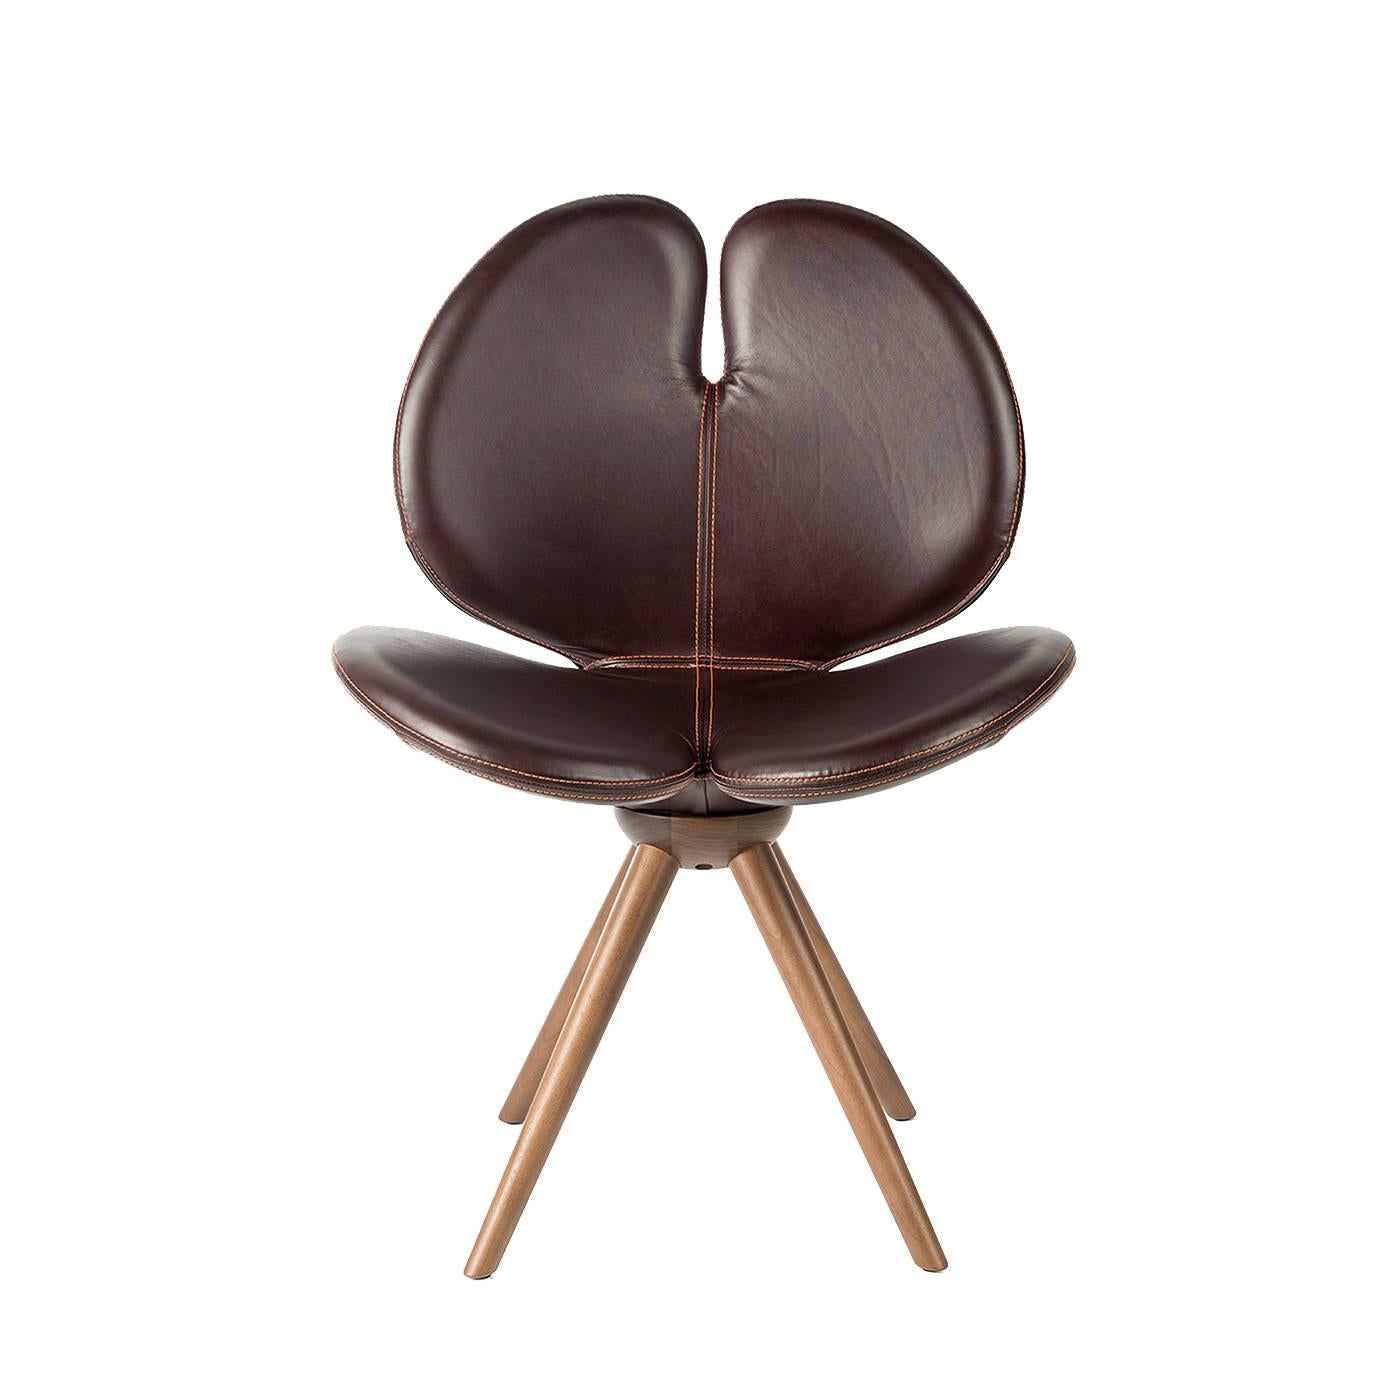 This elegant chair features a modern design that will be particularly suitable for a contemporary decor. Either by the dining table or as an accent chair in the living room, this piece will bring sophistication and character into a home, thanks to